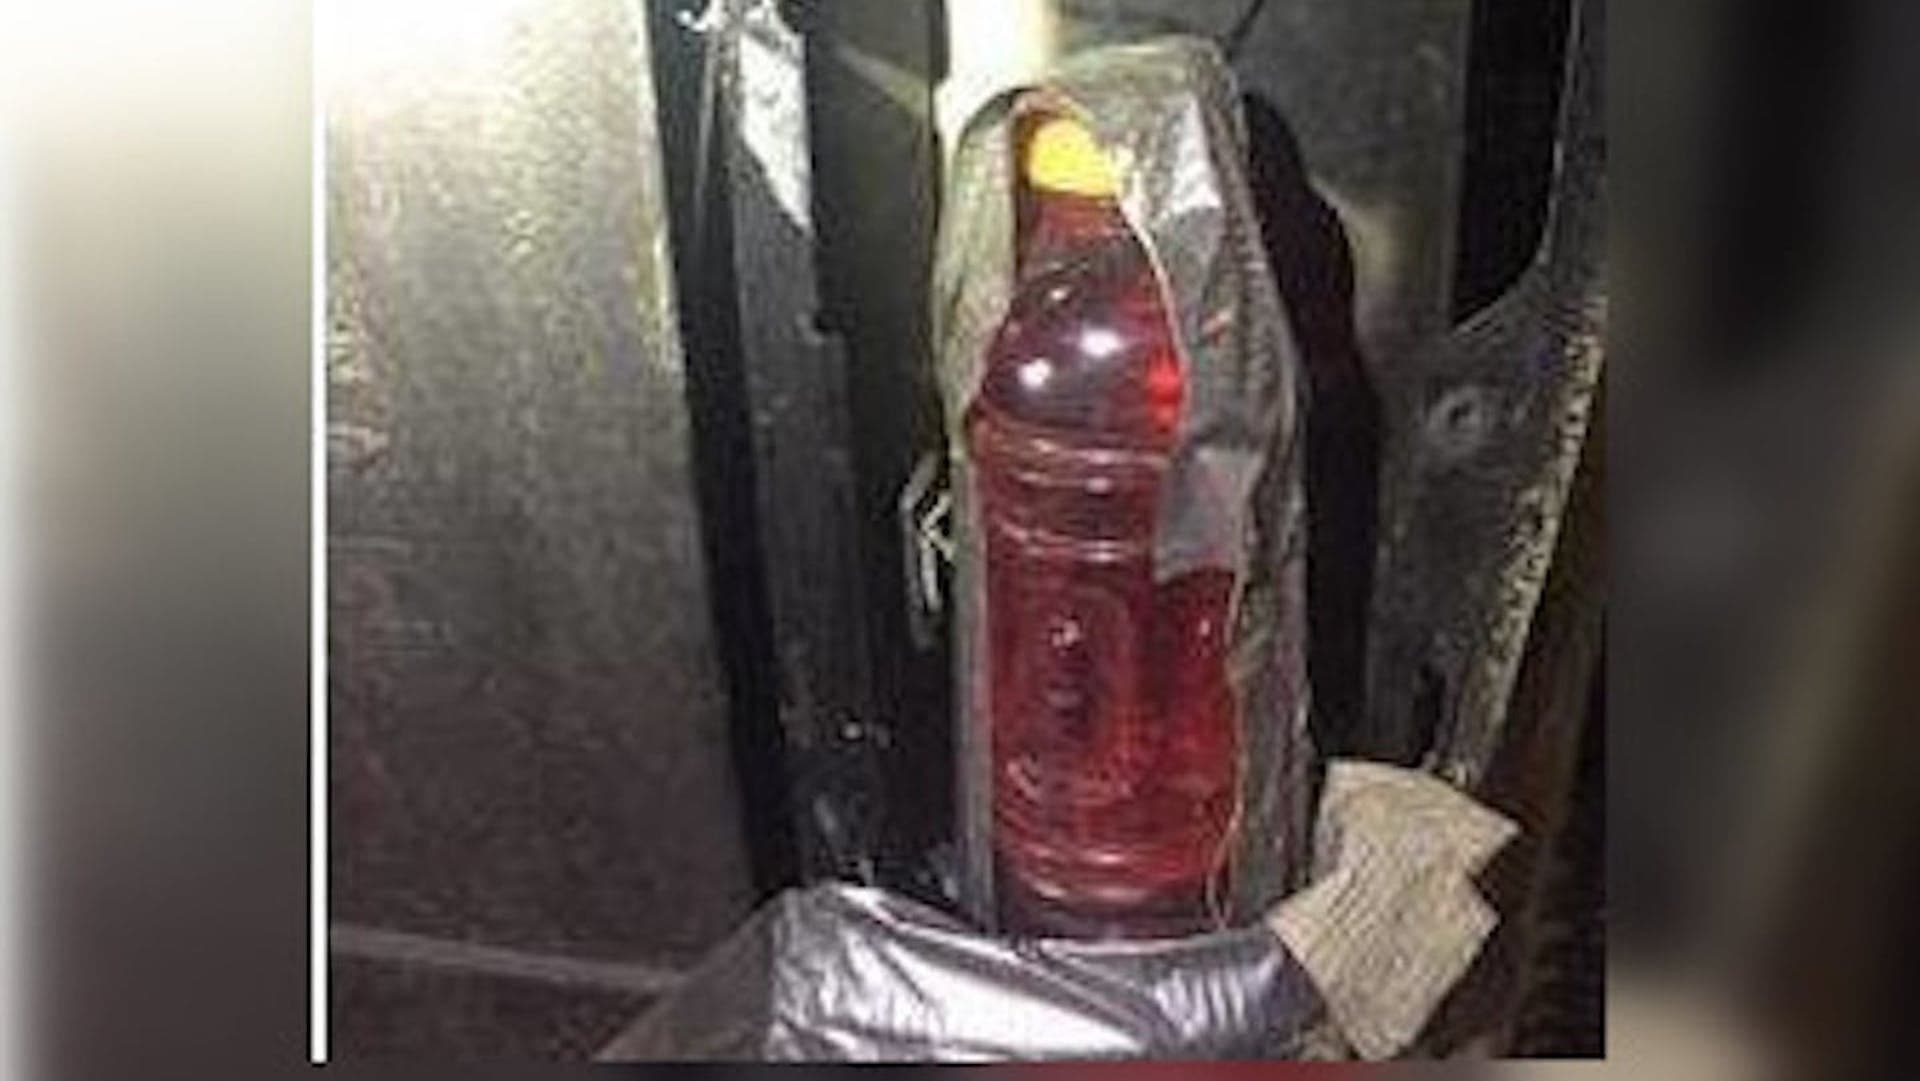 Crafty Truck Driver Escapes Ticket After Using Red Drink Bottle to Fix Broken Taillight